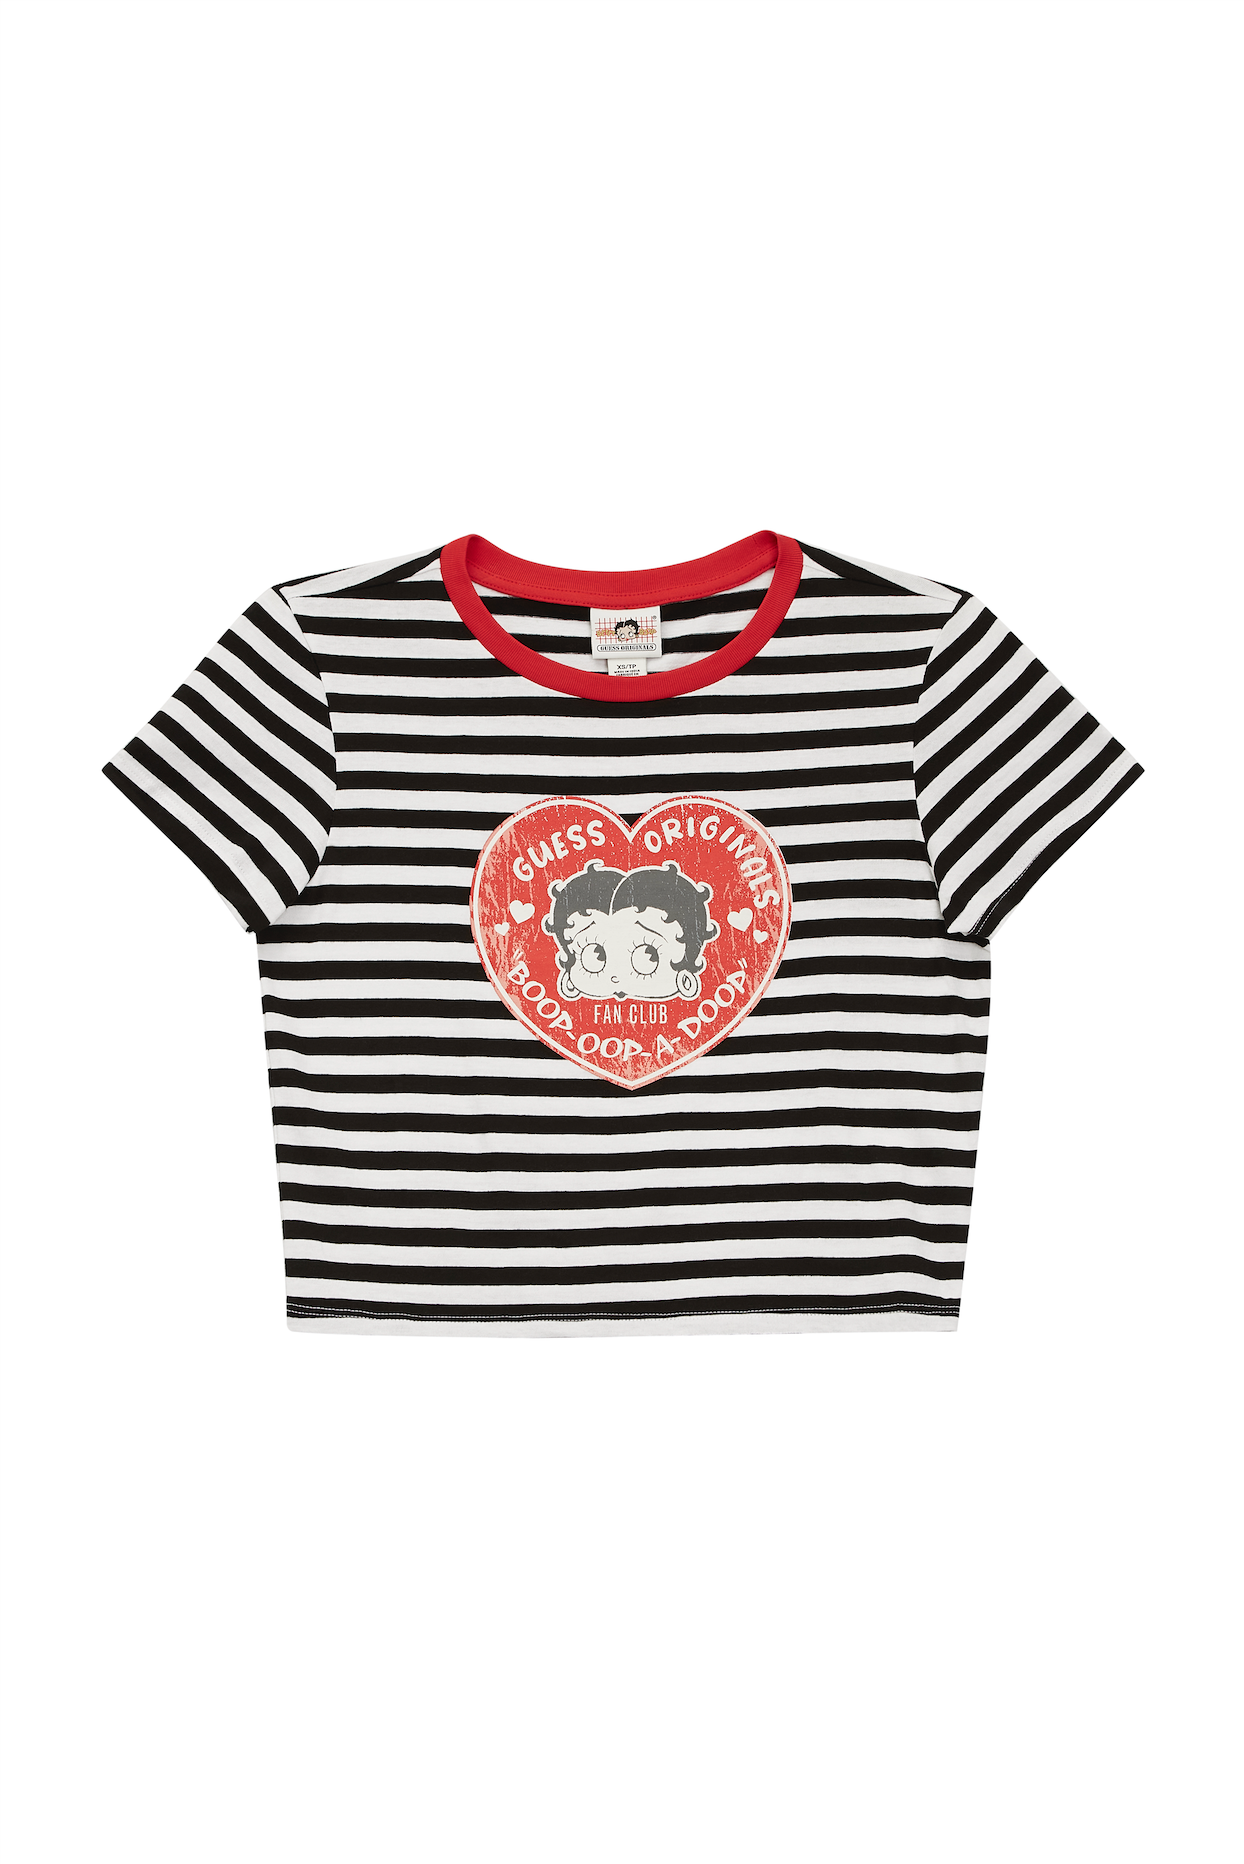 A striped T-shirt with Betty Boop's face inside a heart